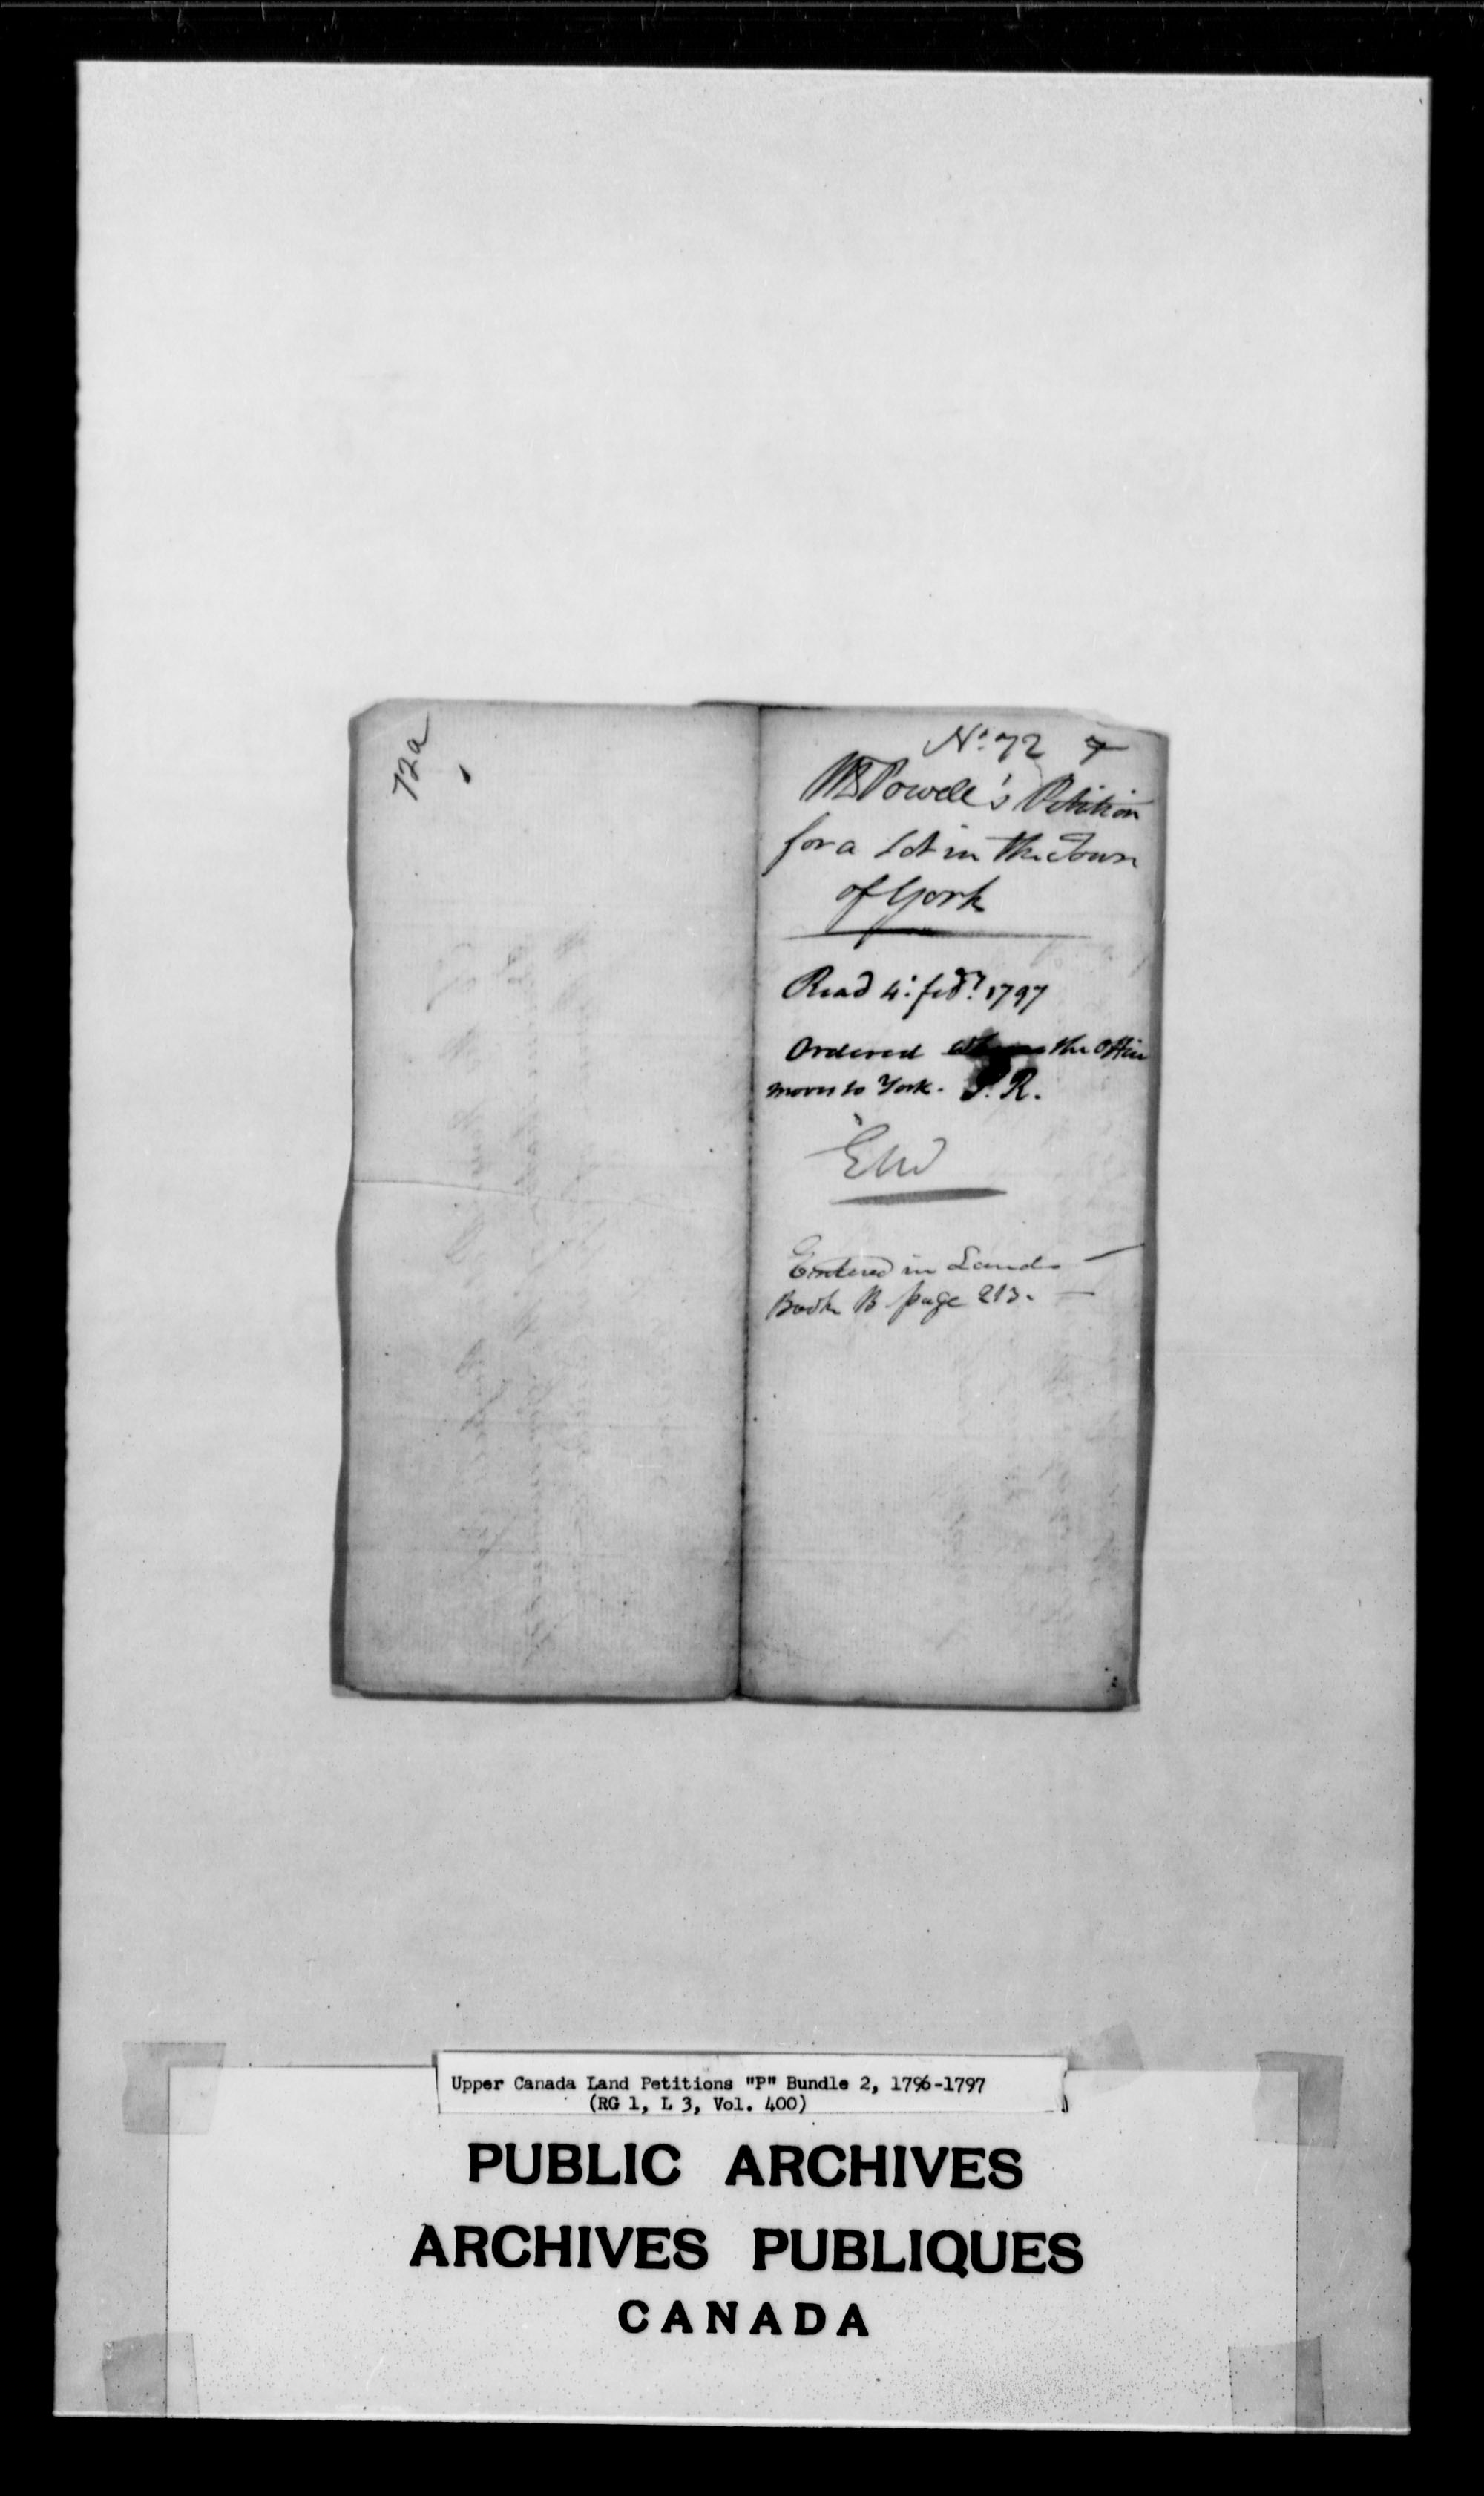 Title: Upper Canada Land Petitions (1763-1865) - Mikan Number: 205131 - Microform: c-2489